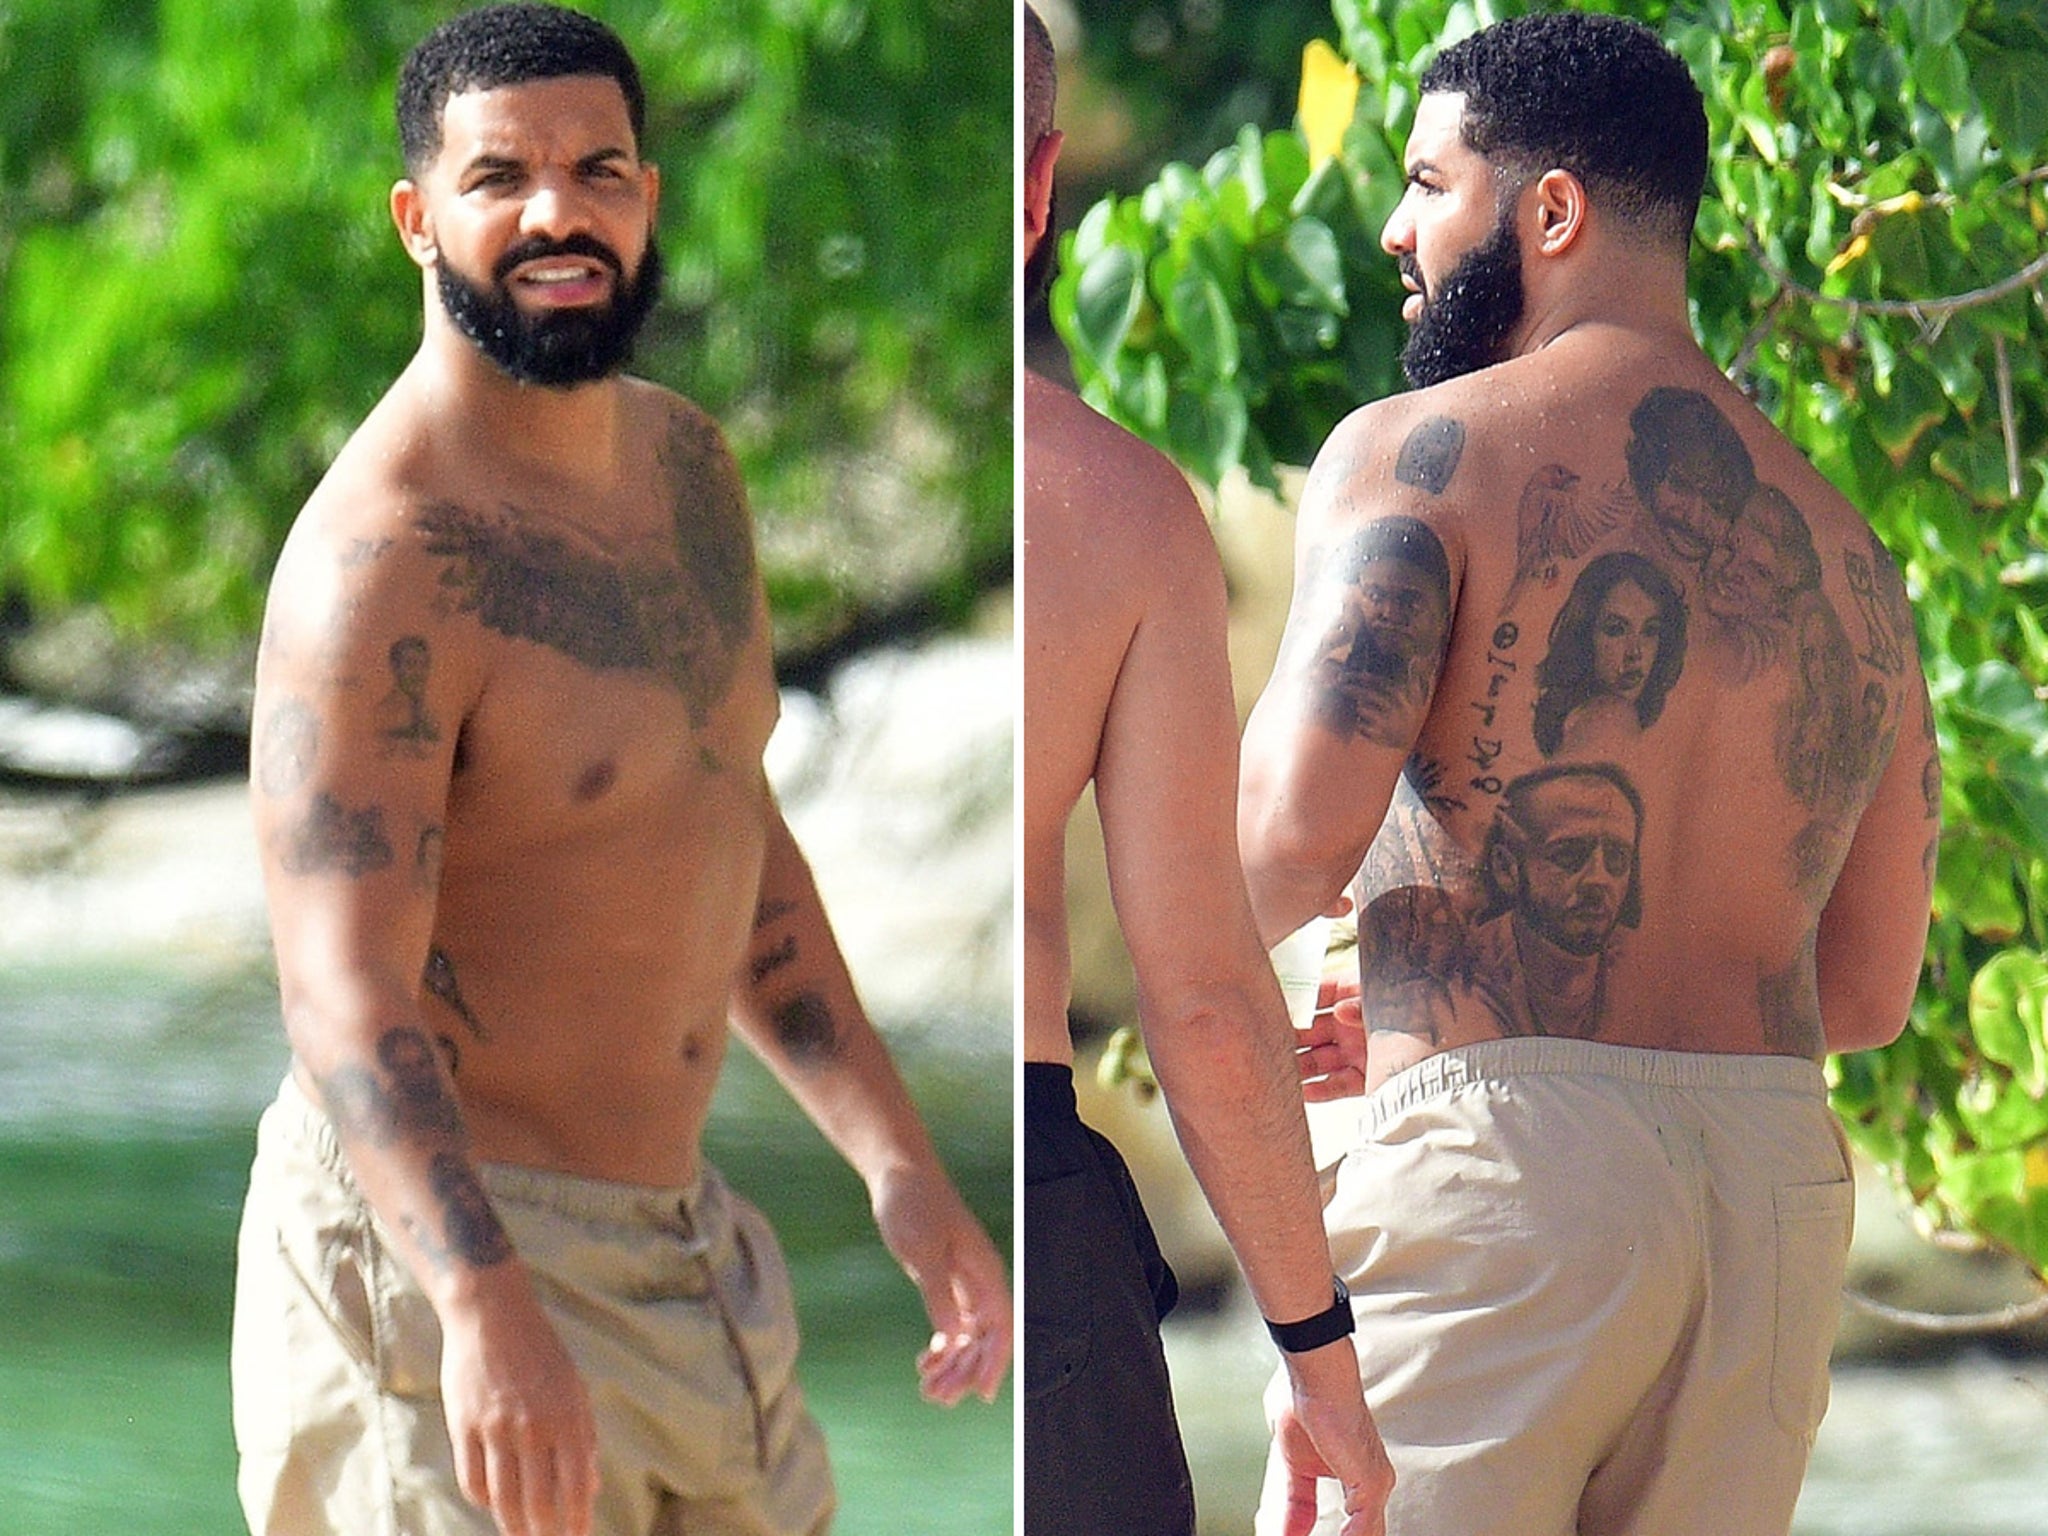 HIP HOP MIN5  In abit to show how much of a proud father he is Drakes  Dad got a tattoo of Drakes face on his arm  hhm5 hiphopmin5  hiphopmusic drake 